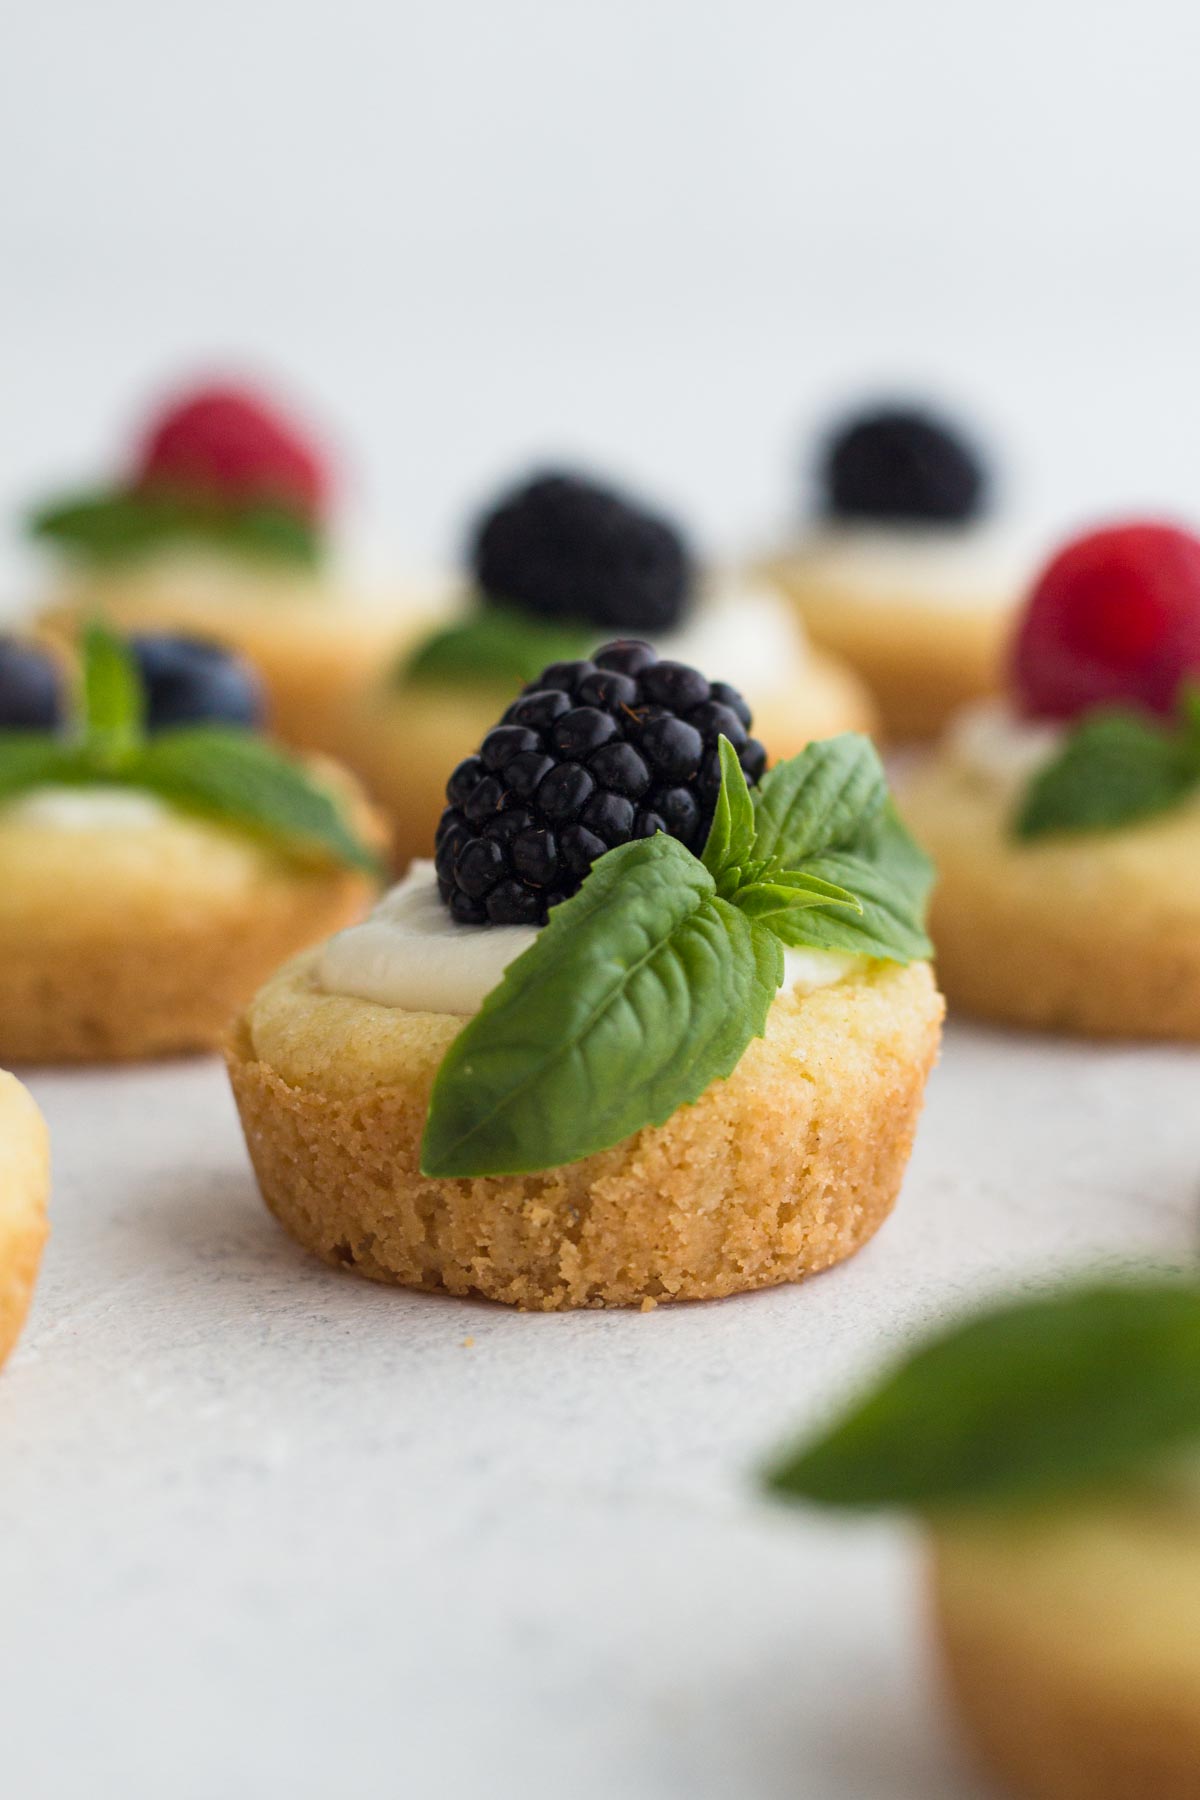 Mini fruit tarts topped with blackberry and a basil sprig on a white surface.